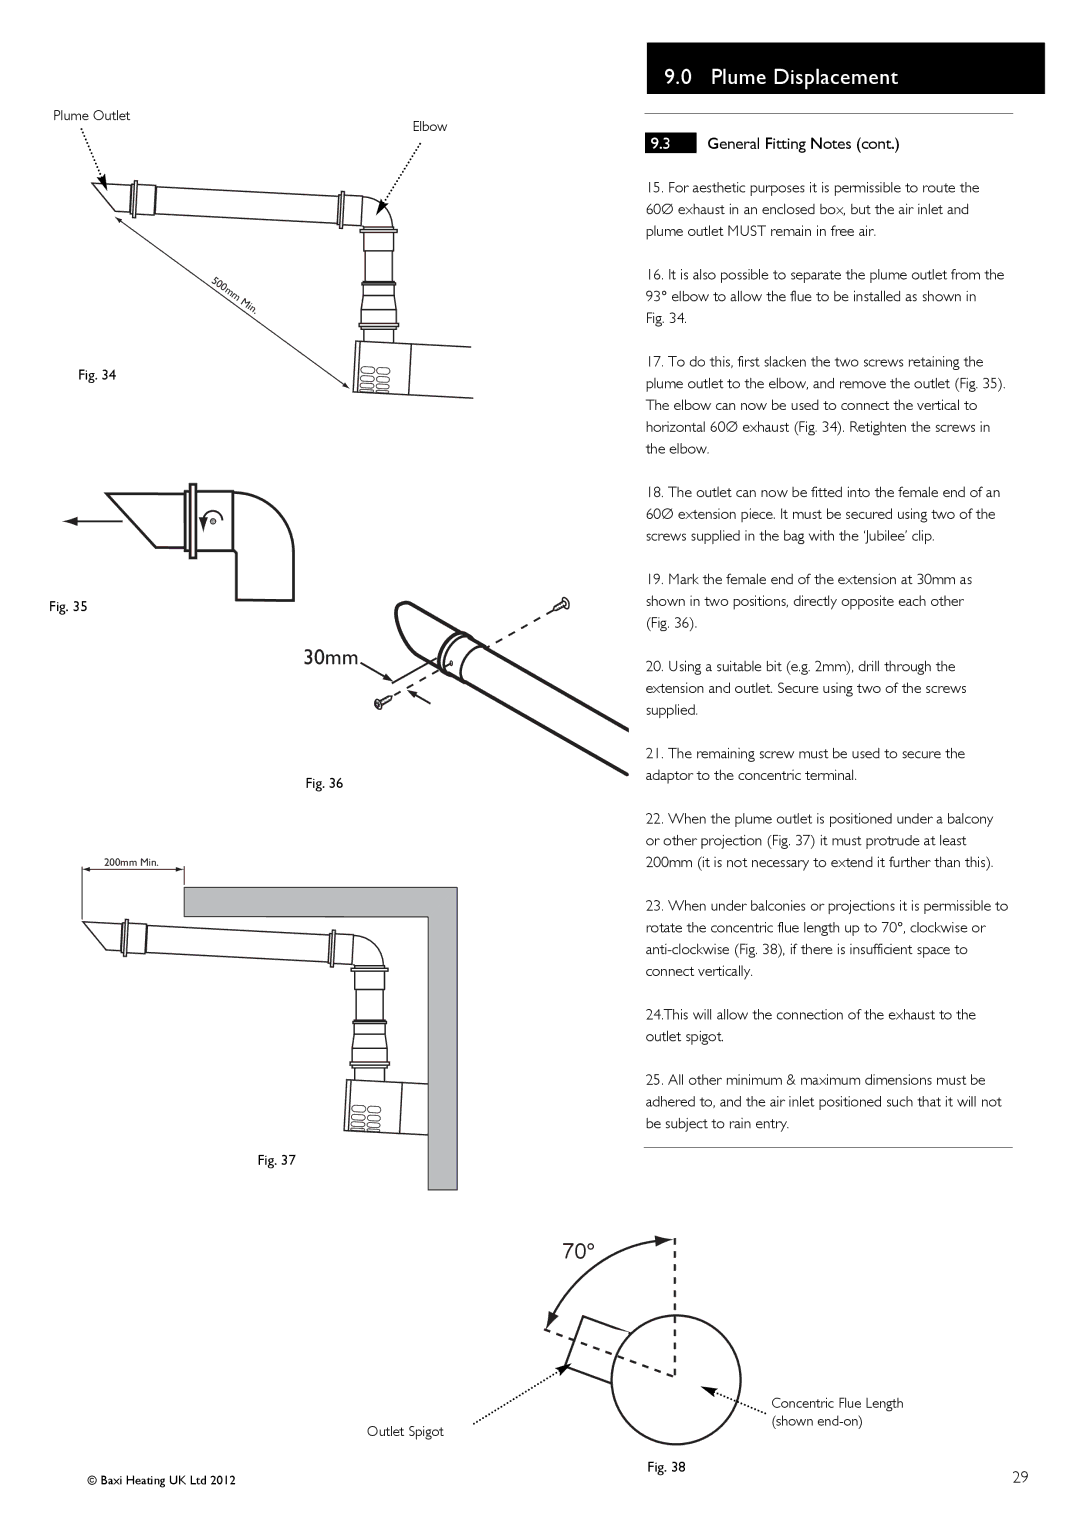 Baxi Potterton 47-393-39 Plume Outlet Elbow, General Fitting Notes, For aesthetic purposes it is permissible to route 